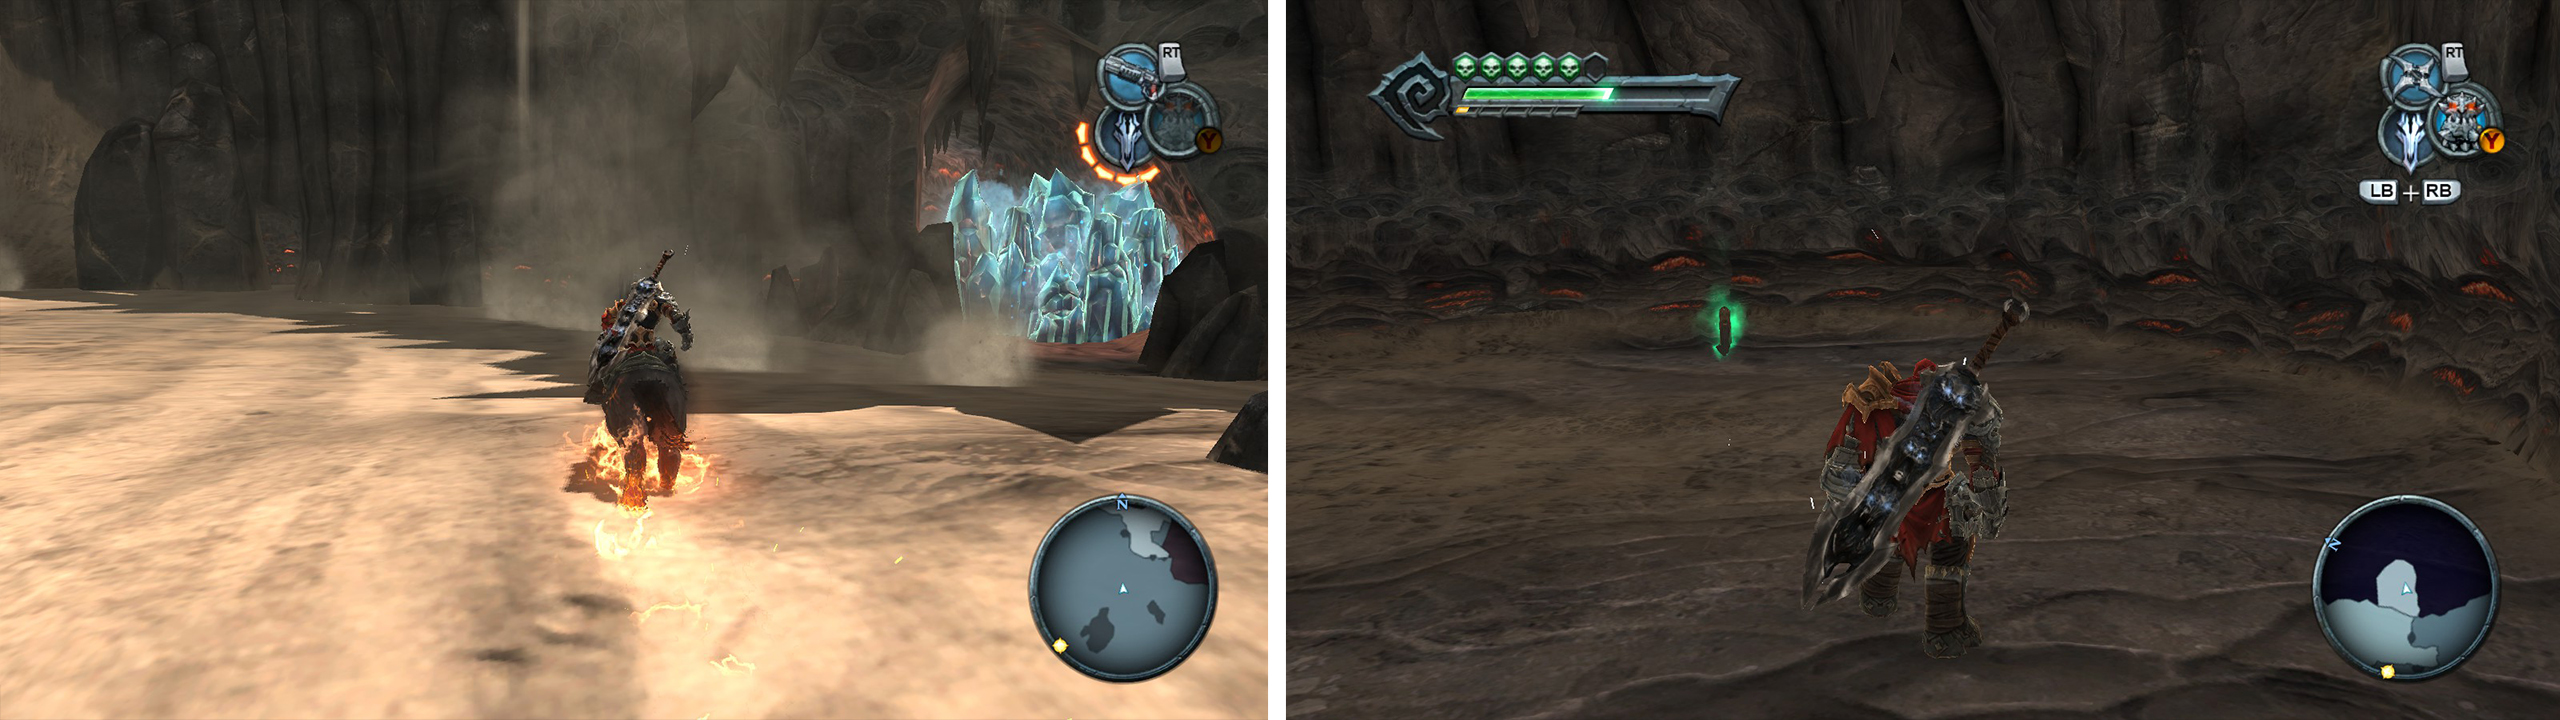 Explore the Ash Lands on horseback and destroy the blue crystals (left) for a Wrath Shard. Use the shadowflight geyser nearby to reach a platform with an Artefact (right).